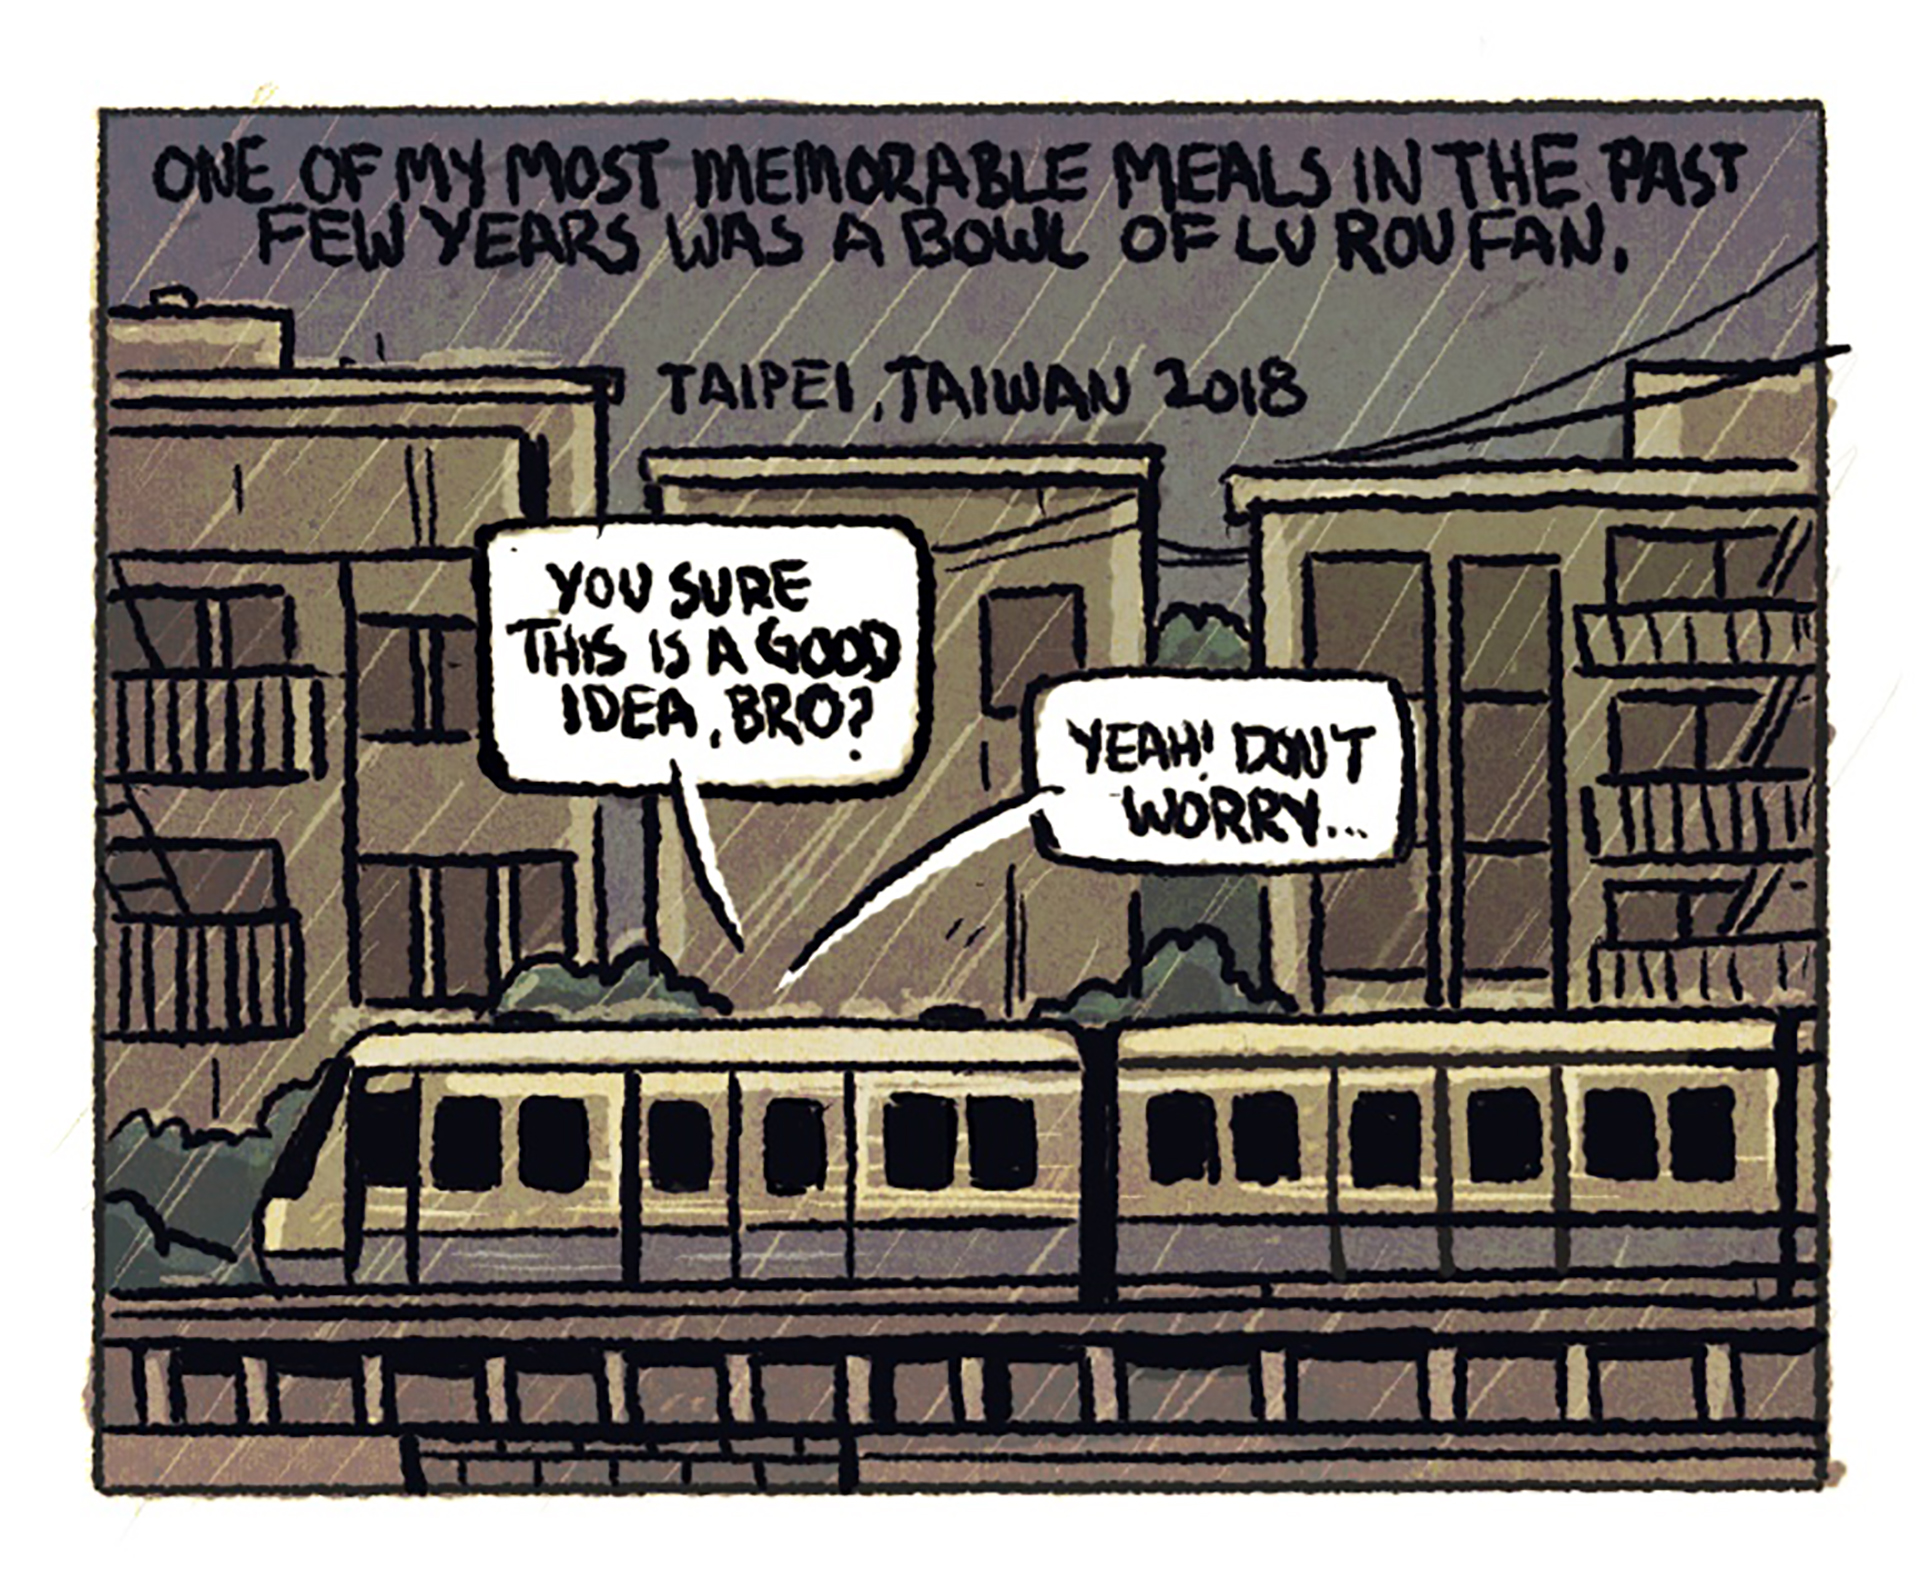 A subway train is traveling above ground in the rain. The narration reads, "One of my most memorable meals in the past few years was a bowl of lu rou fan; Taipei, Taiwan 2018." 1st speech bubble: "You sure this is a good idea, bro?" 2nd speech bubble: "Yeah! Don't worry..."